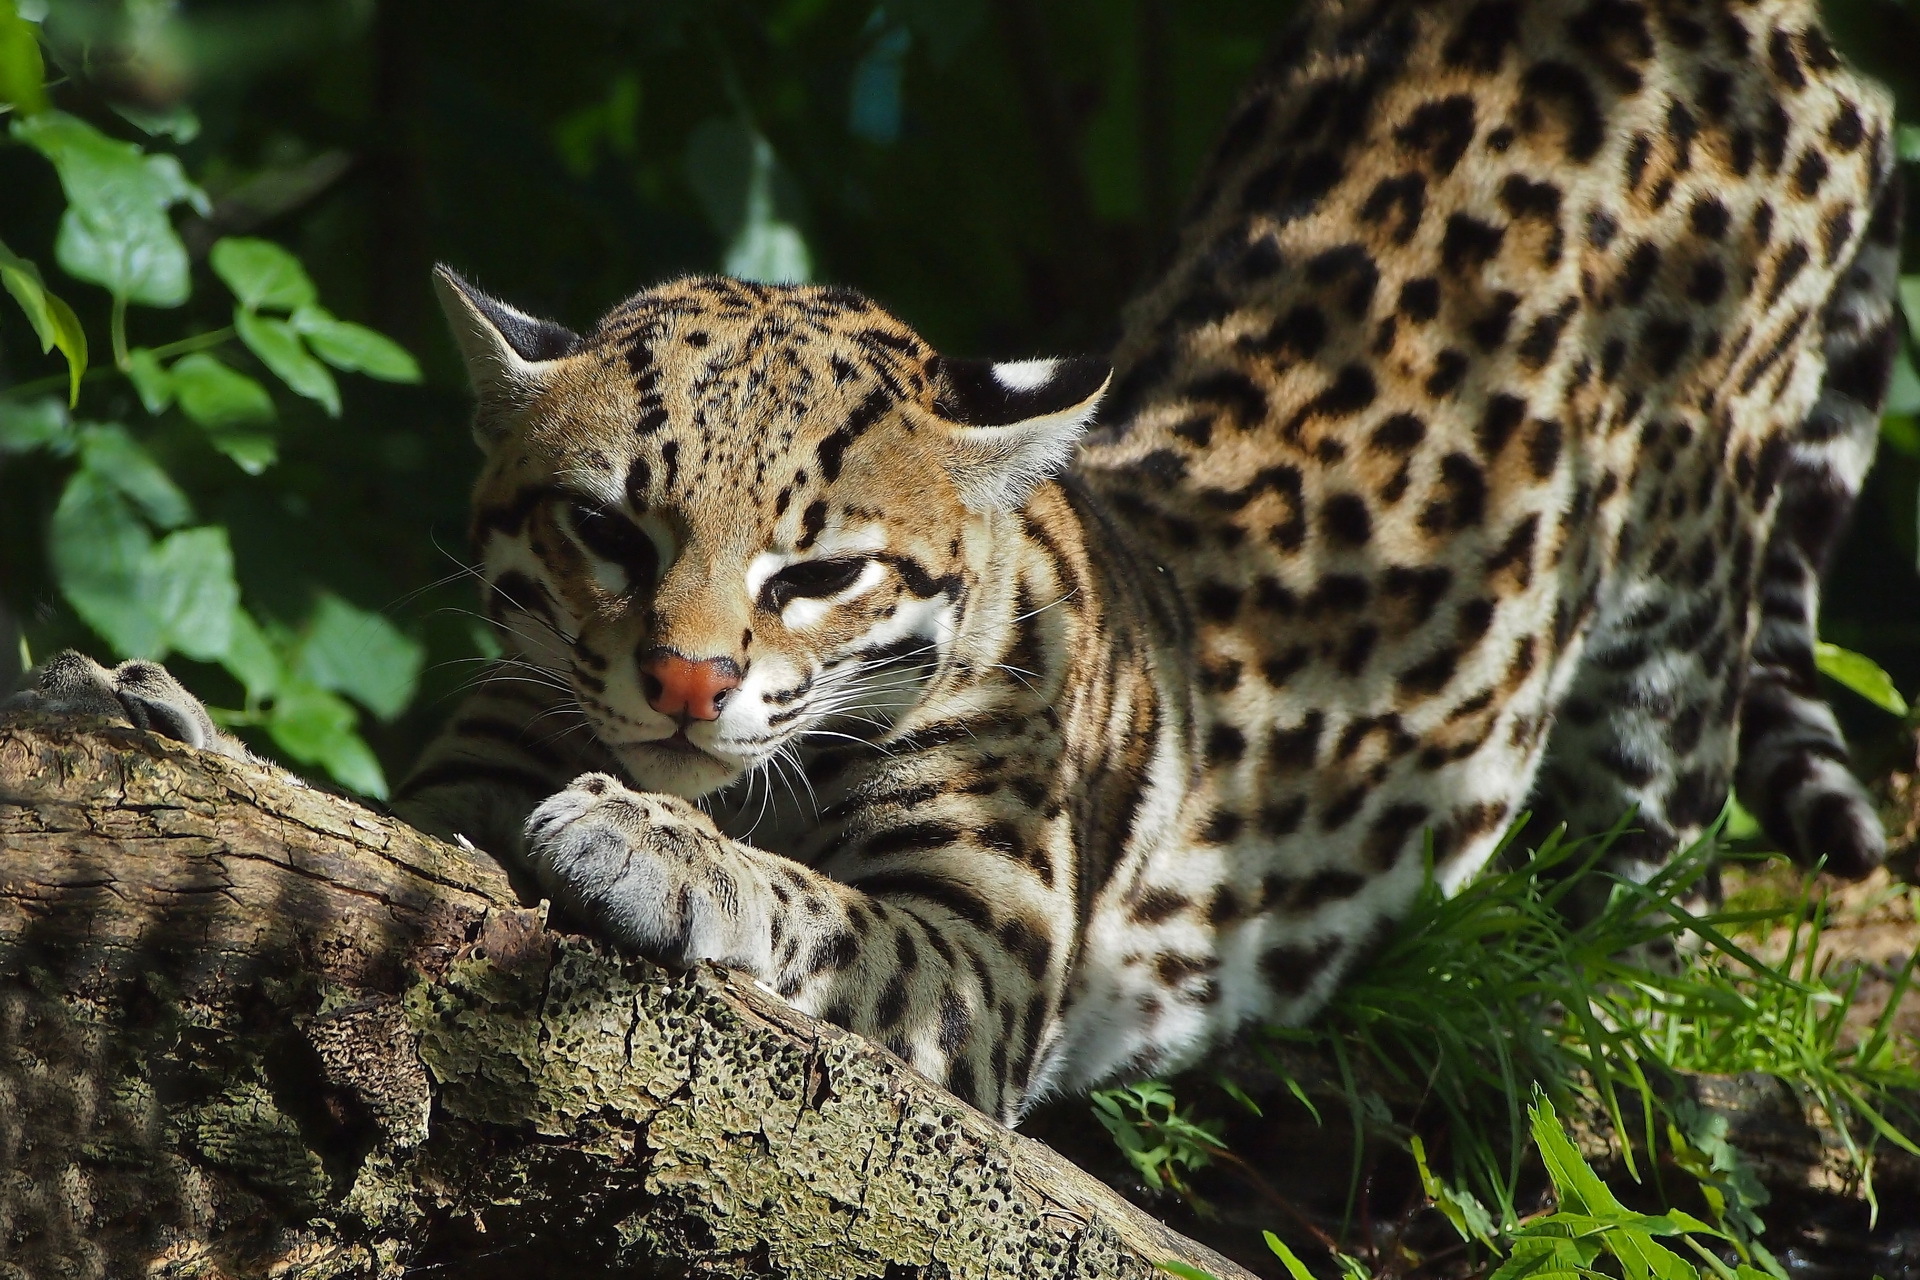 What is the title of this picture ? Ocelot Wallpaper - WallpaperSafari